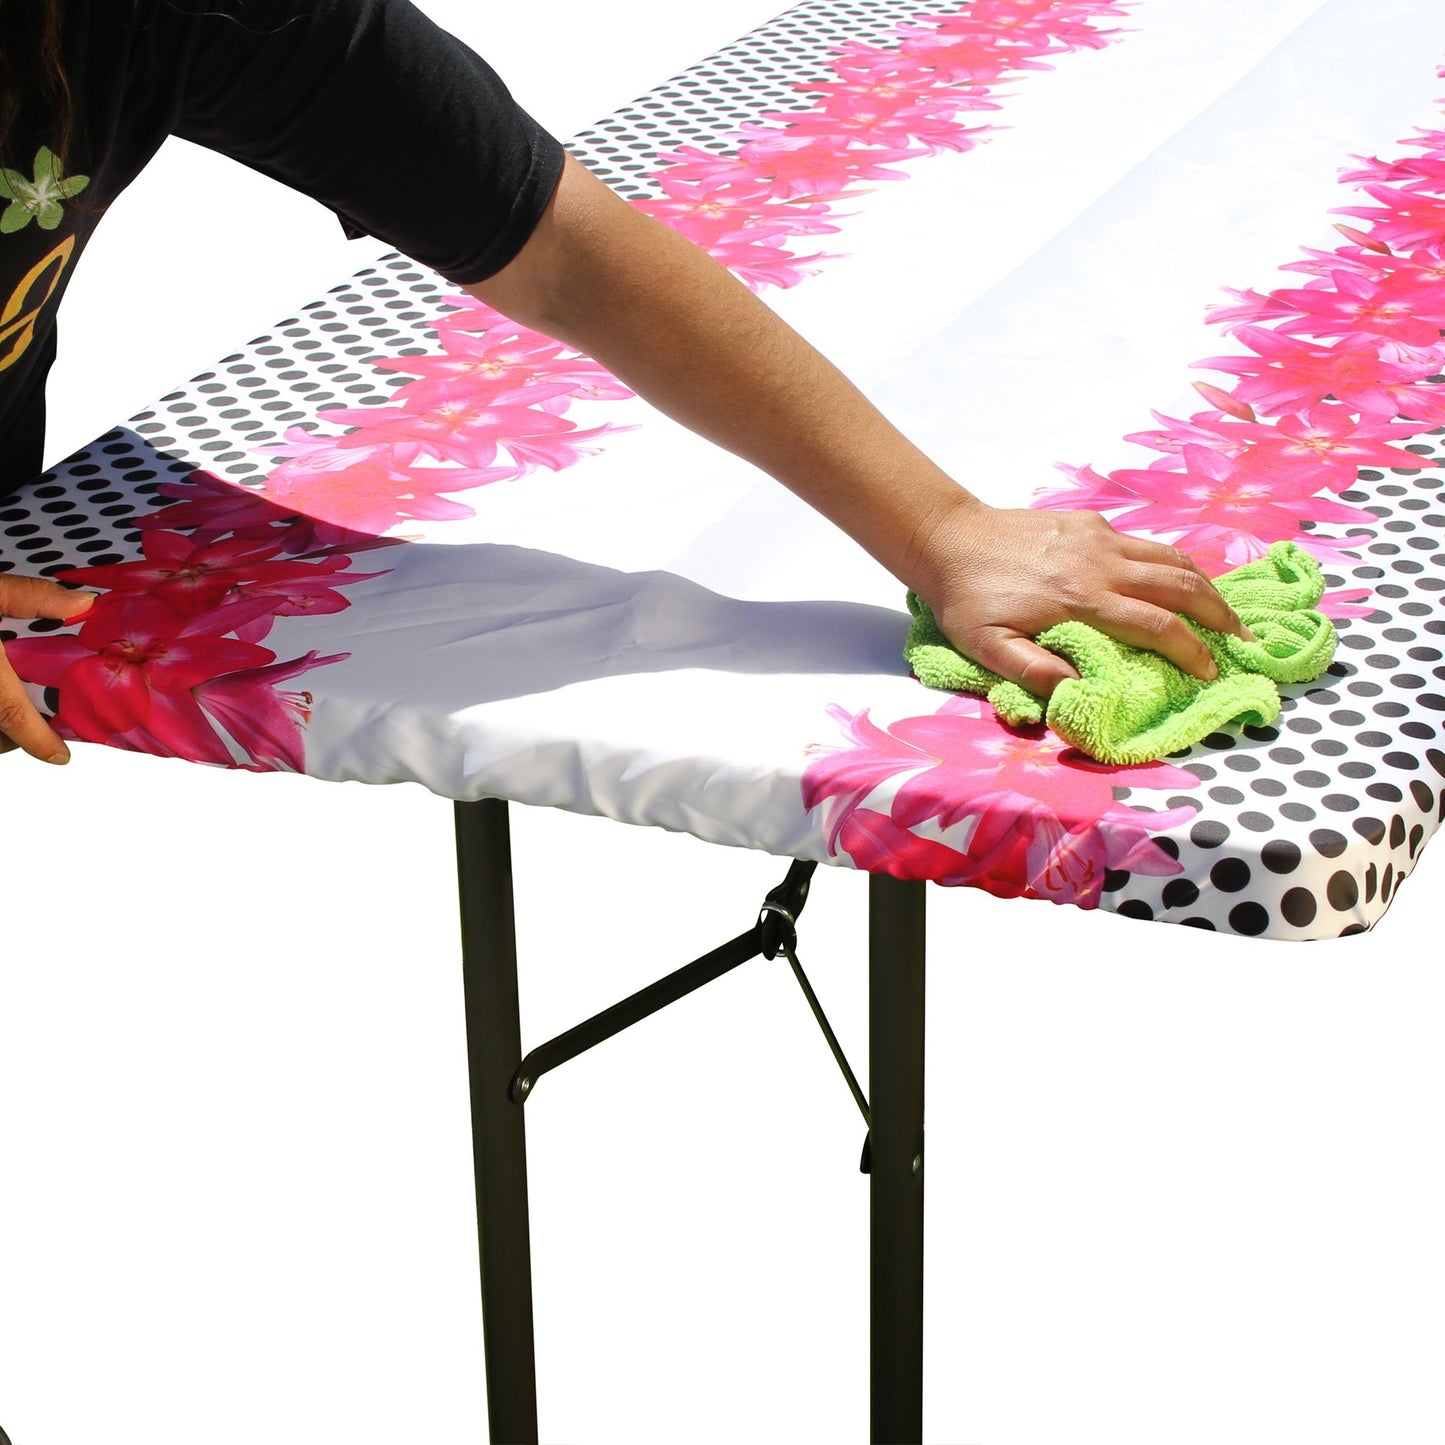 TableCloth PLUS 72" Lilies Fitted Polyester Tablecloth for 6' Folding Tables can be wiped clean with a cloth